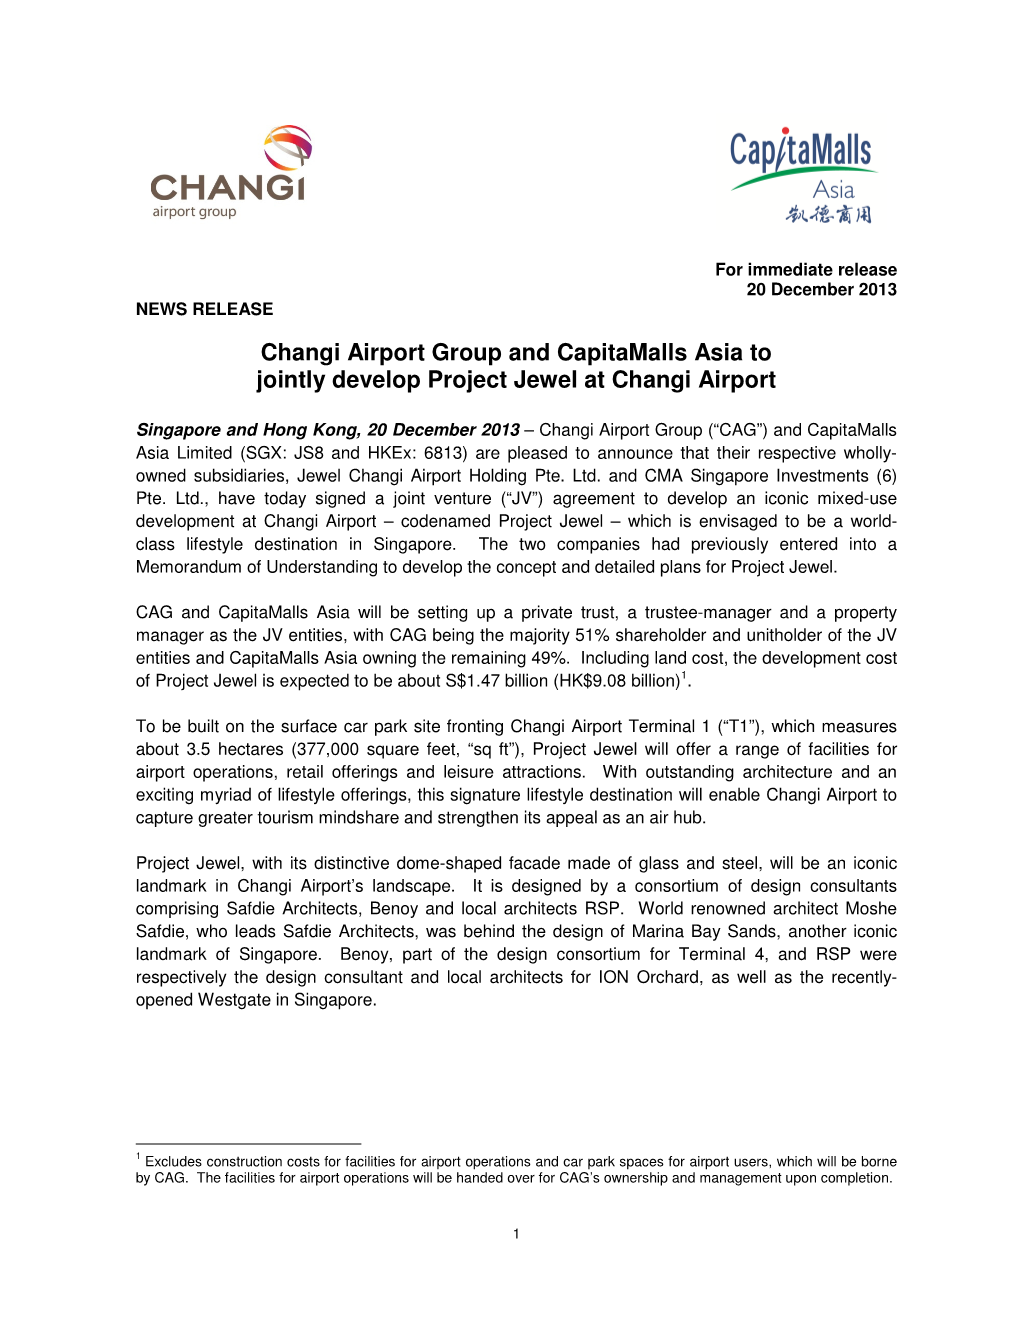 Changi Airport Group and Capitamalls Asia to Jointly Develop Project Jewel at Changi Airport